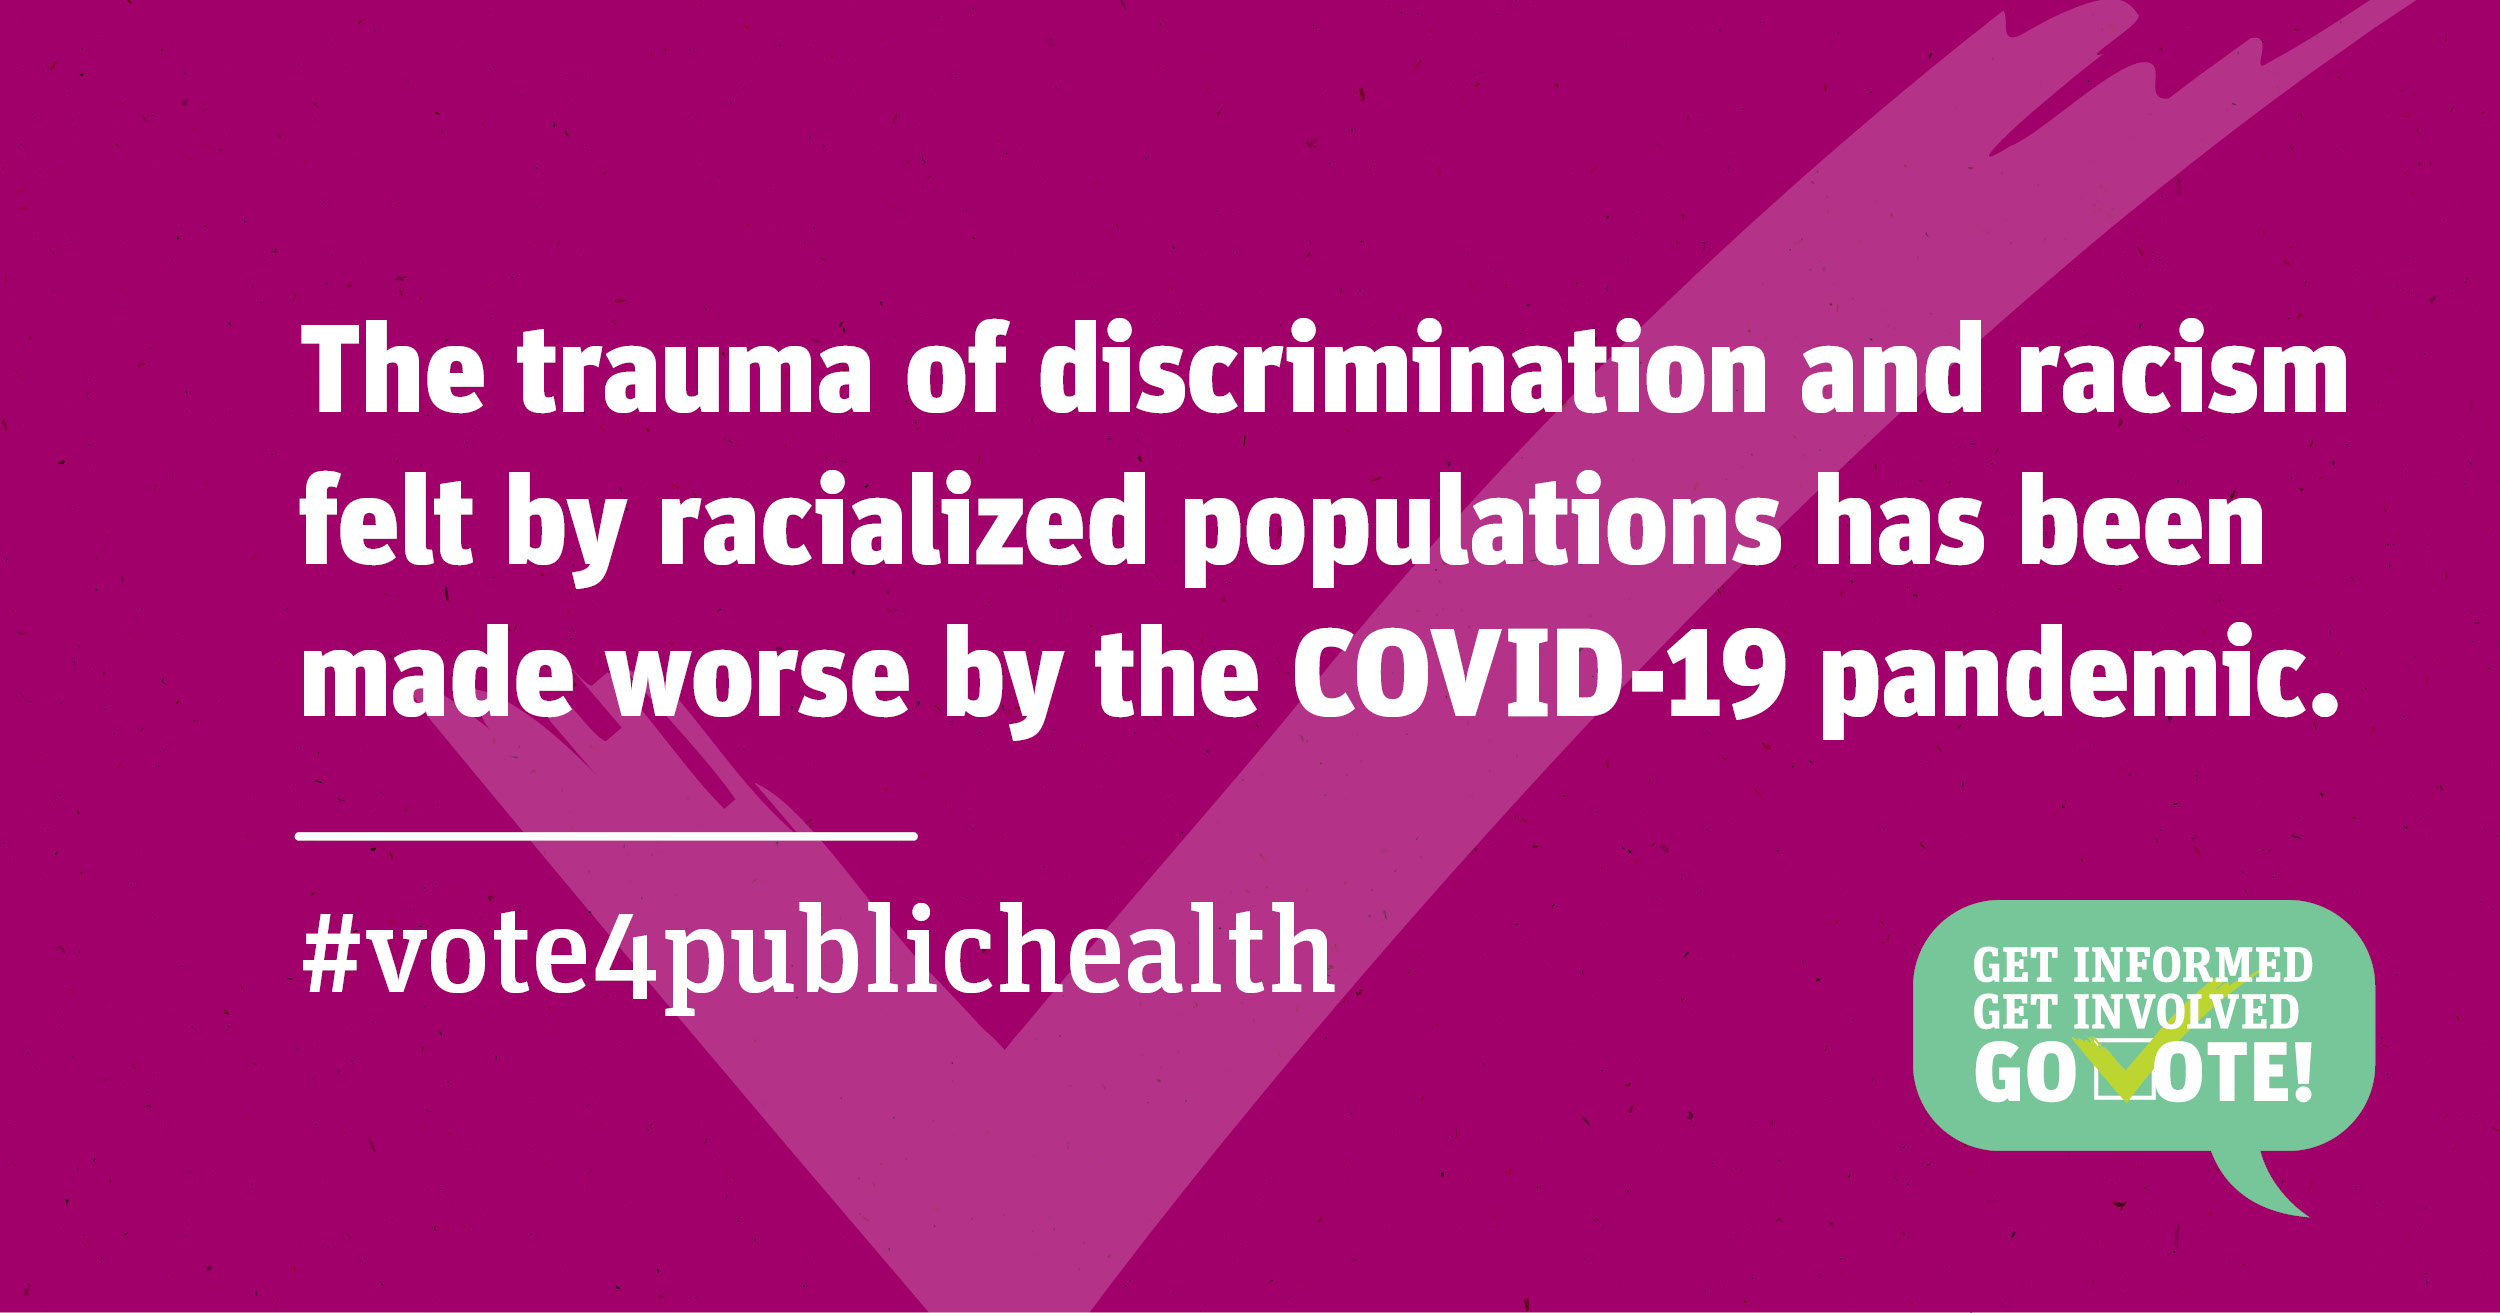 The trauma of discrimination and racism felt by racialized populations has been made worse by the COVID-19 pandemic.